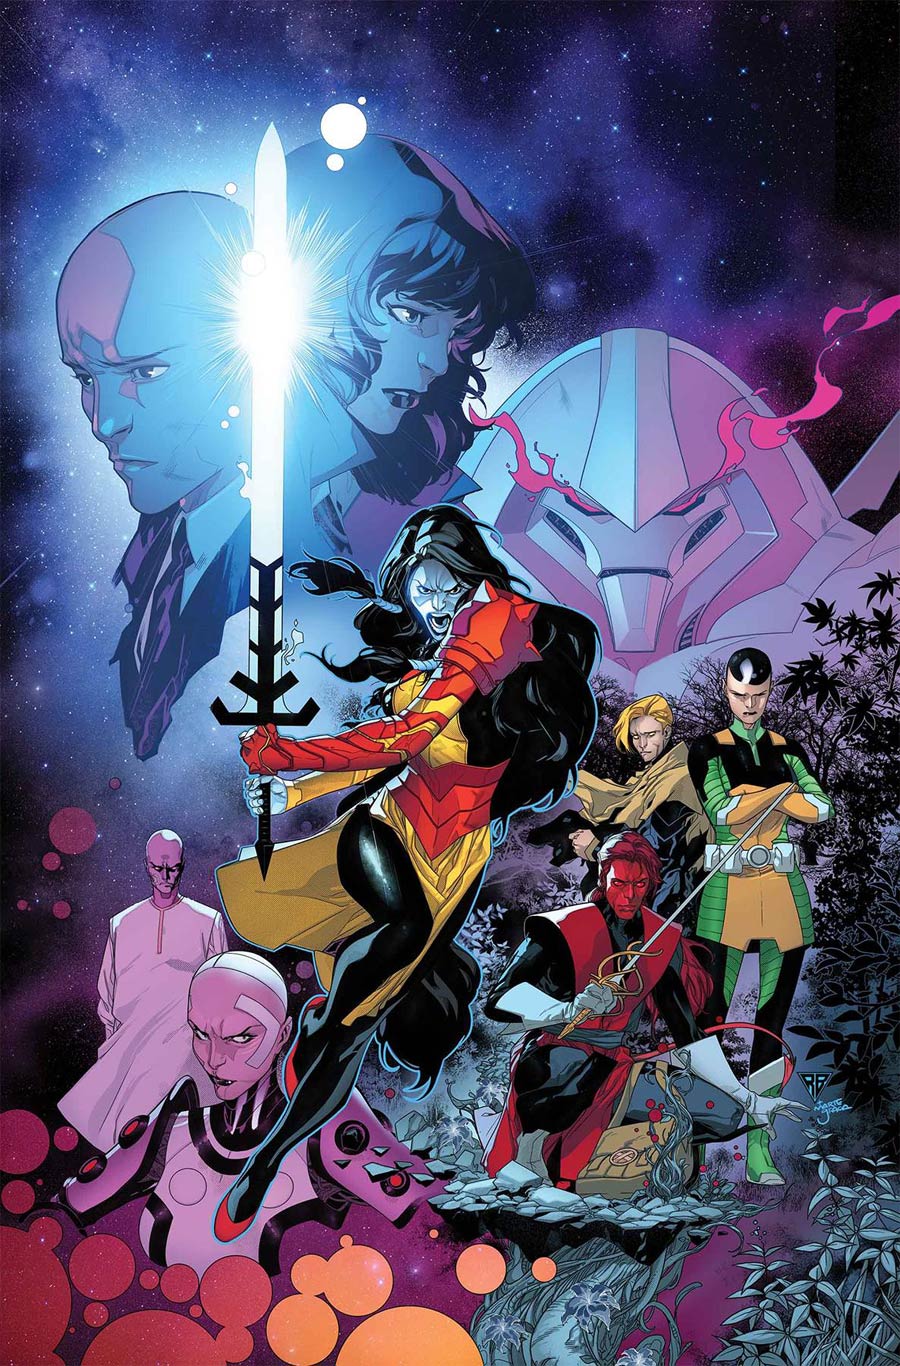 Powers Of X #1 By RB Silva Poster